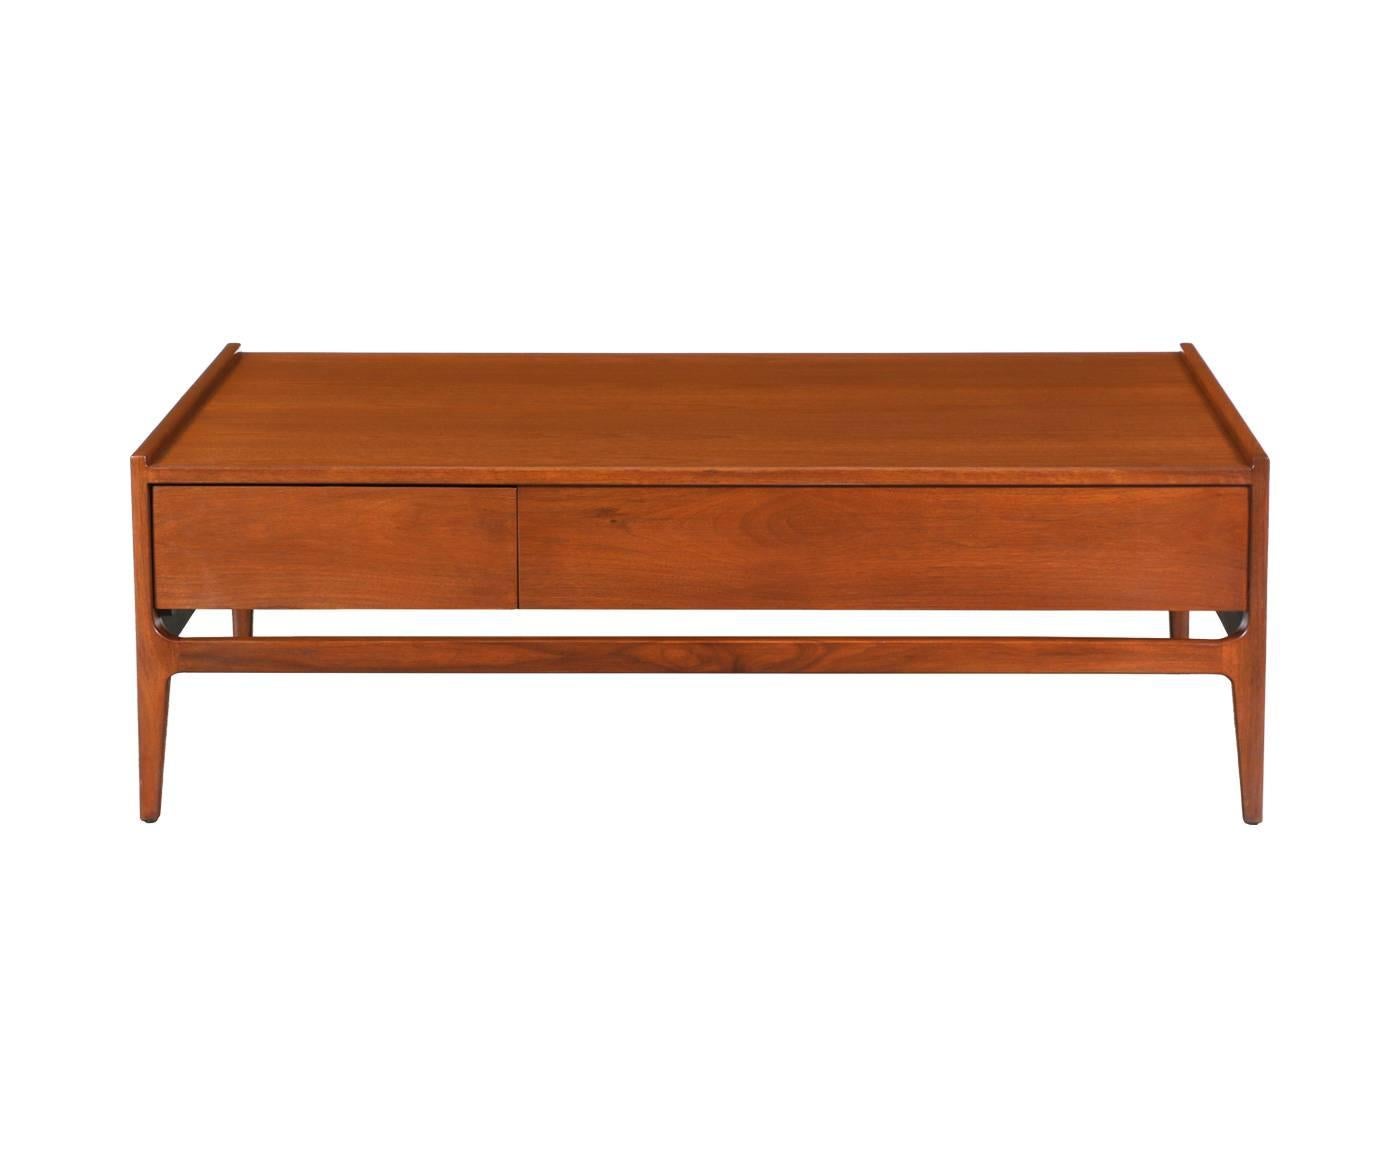 Designer: Richard Thompson.
Manufacturer: Glenn of California.
Period/Style: Mid-Century Modern.
Country: United States.
Date: 1950s.

Dimensions: 16″ H x 48.25″ W x 30″ D.
Materials: Walnut.
Condition: Excellent, newly refinished.
Number